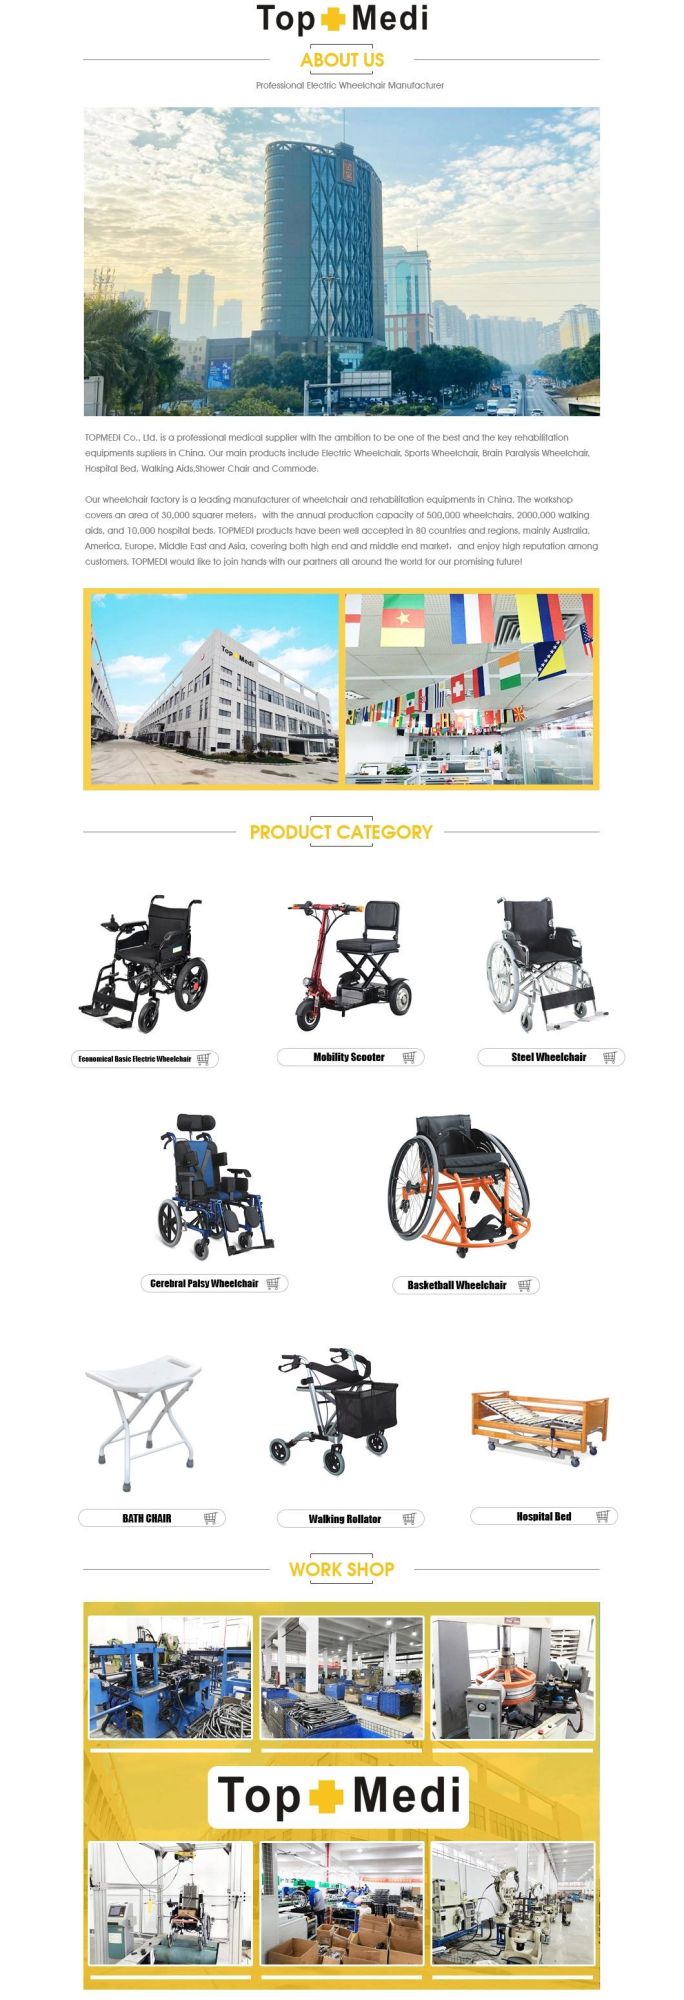 Electric Lift Transfer Commode Wheelchair